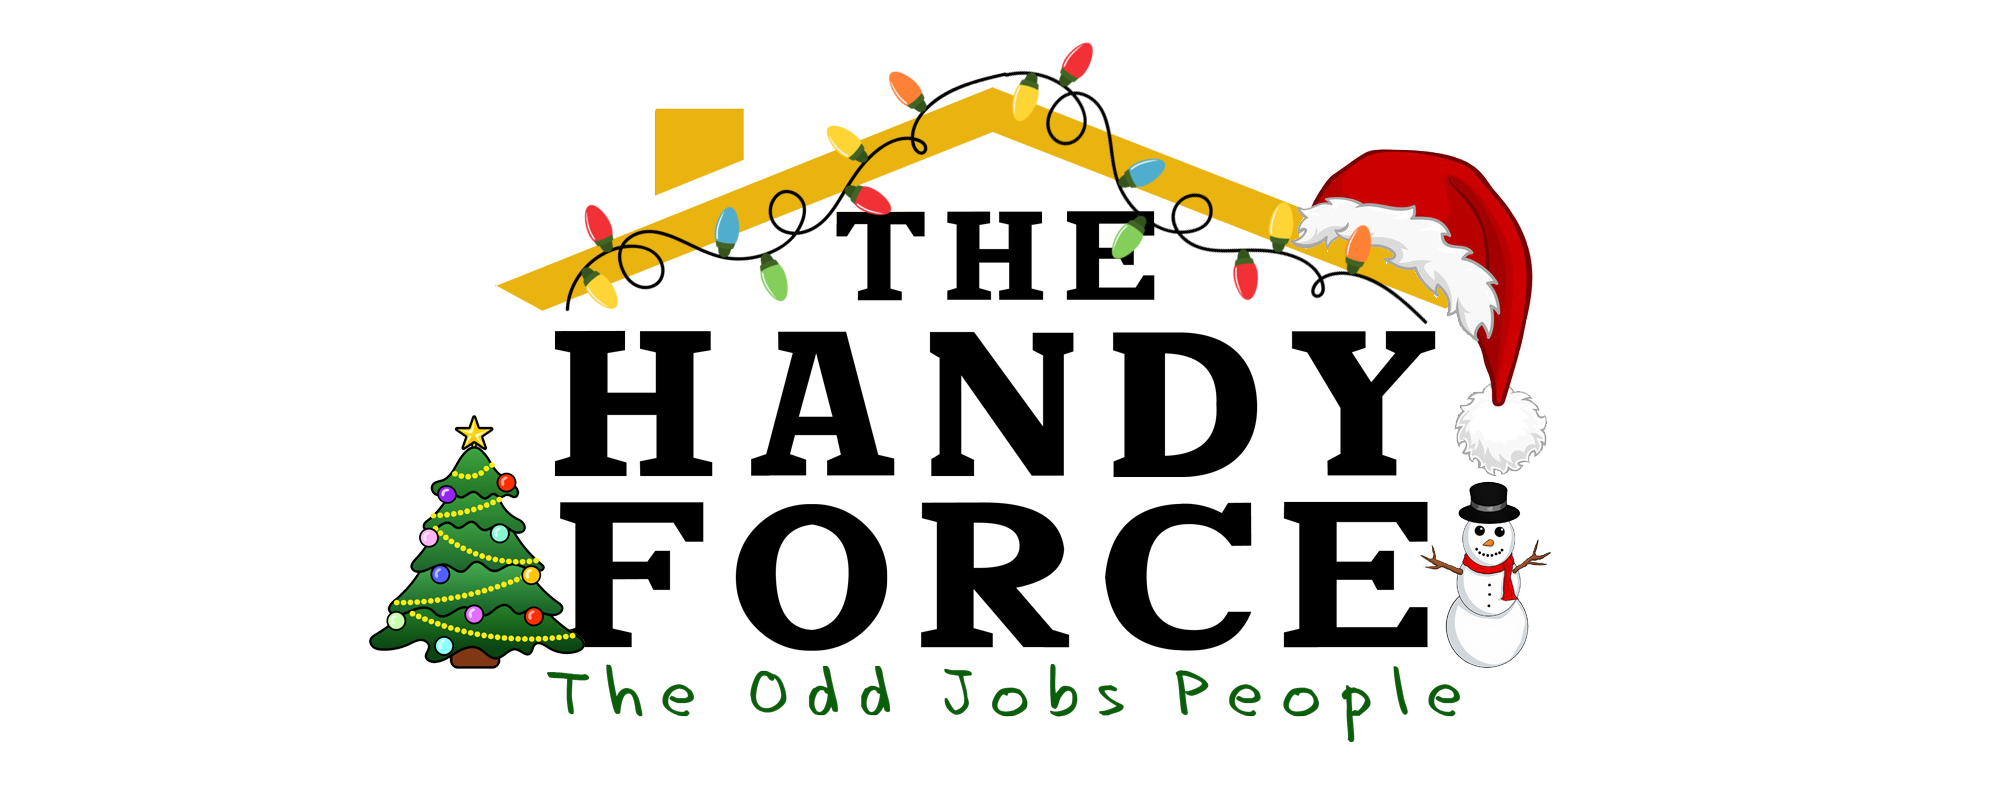 Cheers to a Toolbox Full of Joy Happy Holidays from The HandyForce